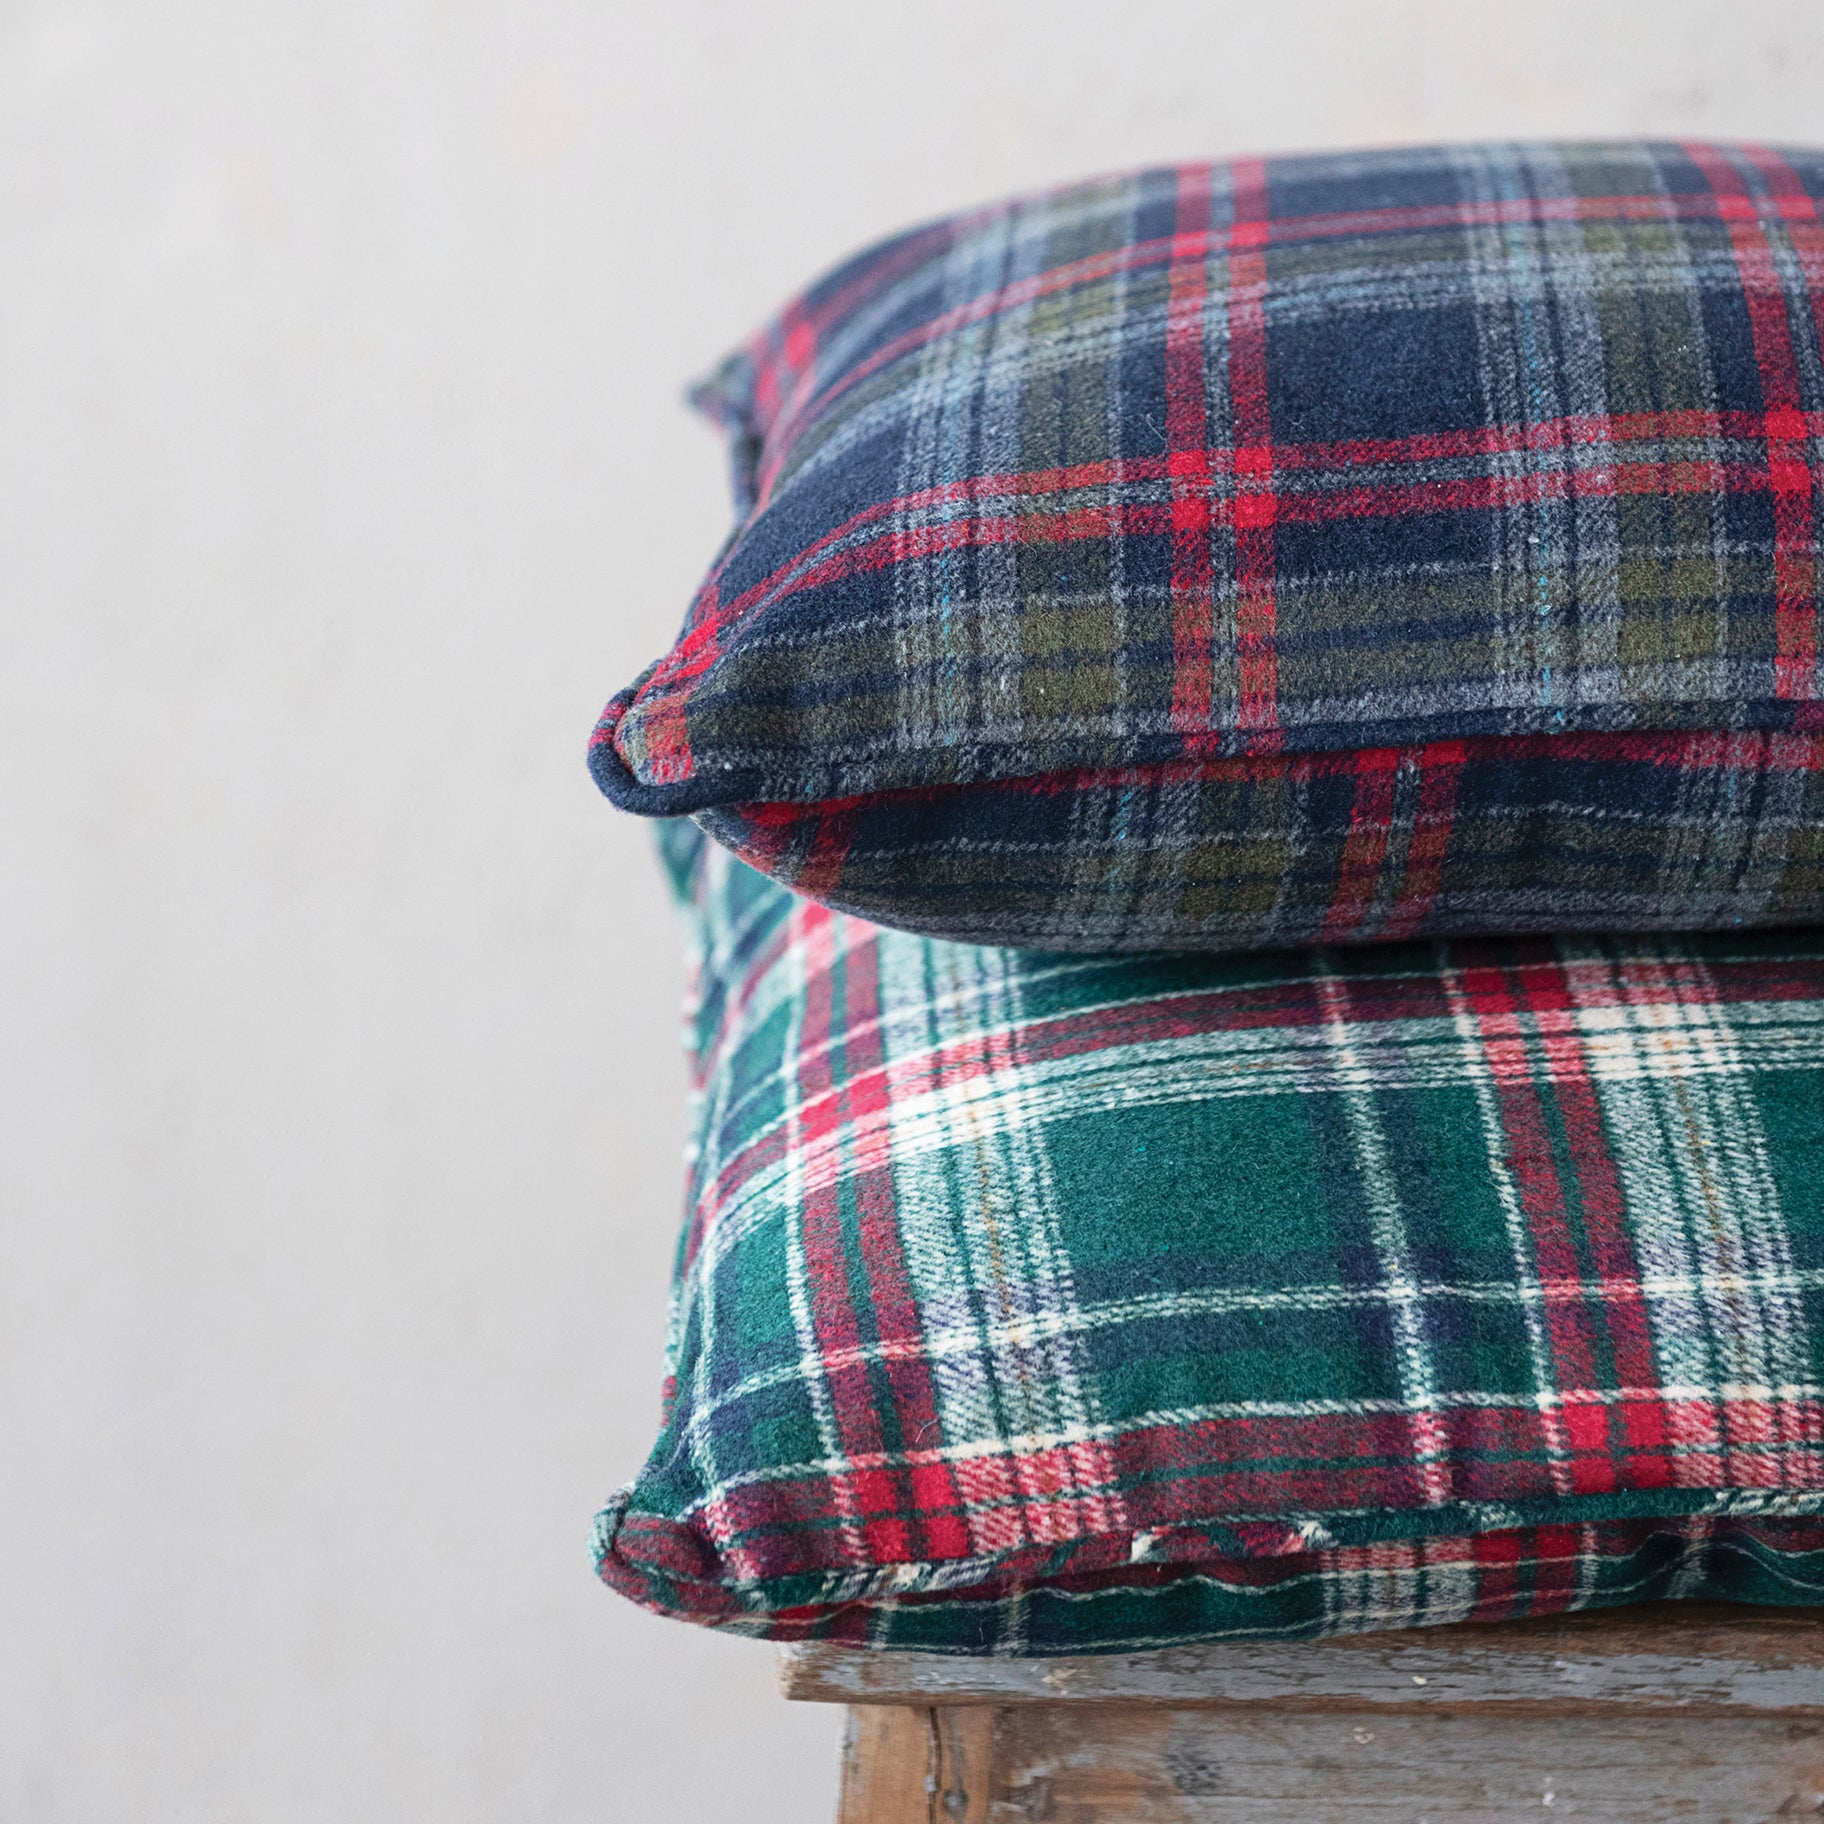 Plaid Red and Green Christmas Pillow